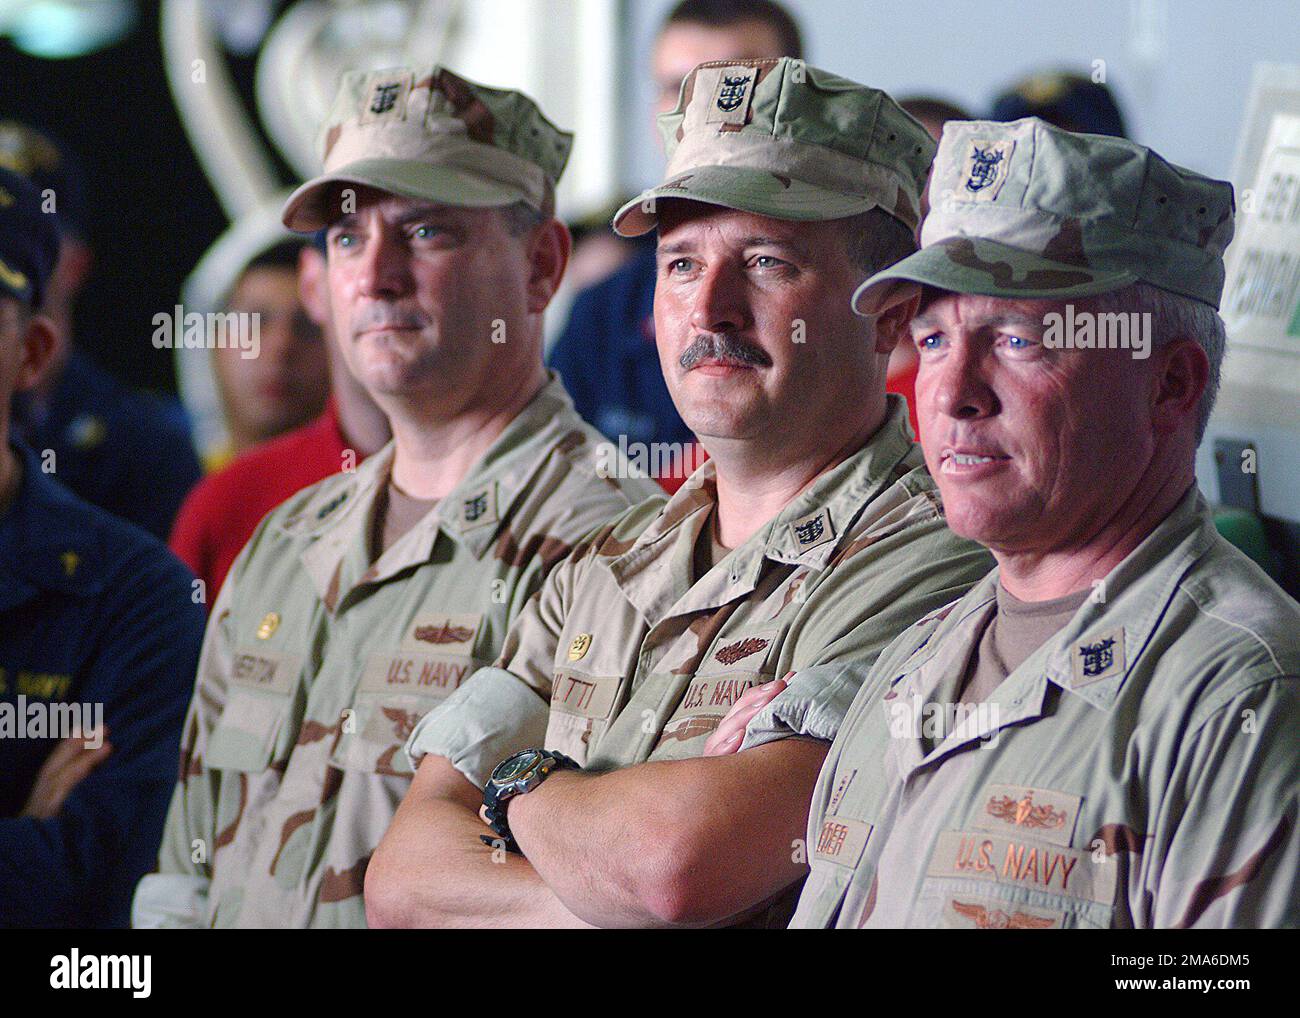 Three of the US Navys (USN) top Command MASTER Chiefs (CMC) observe an all hands call held aboard the Wasp Class: Amphibious Assault Ship, USS KEARSARGE (LHD 3), during their trip to the Persian Gulf focusing on Sailors issues in regards to training, equipment, and manning. Pictured left-to-right, MASTER CHIEF PETTY Officer (MCPO) Terry Etherton, 3rd Fleet CMC; MCPO Don Kultti, 2nd Fleet CMC and MCPO Kelly Schneider, 5th Fleet CMC. Base: USS Kearsarge (LHD 3) Stock Photo